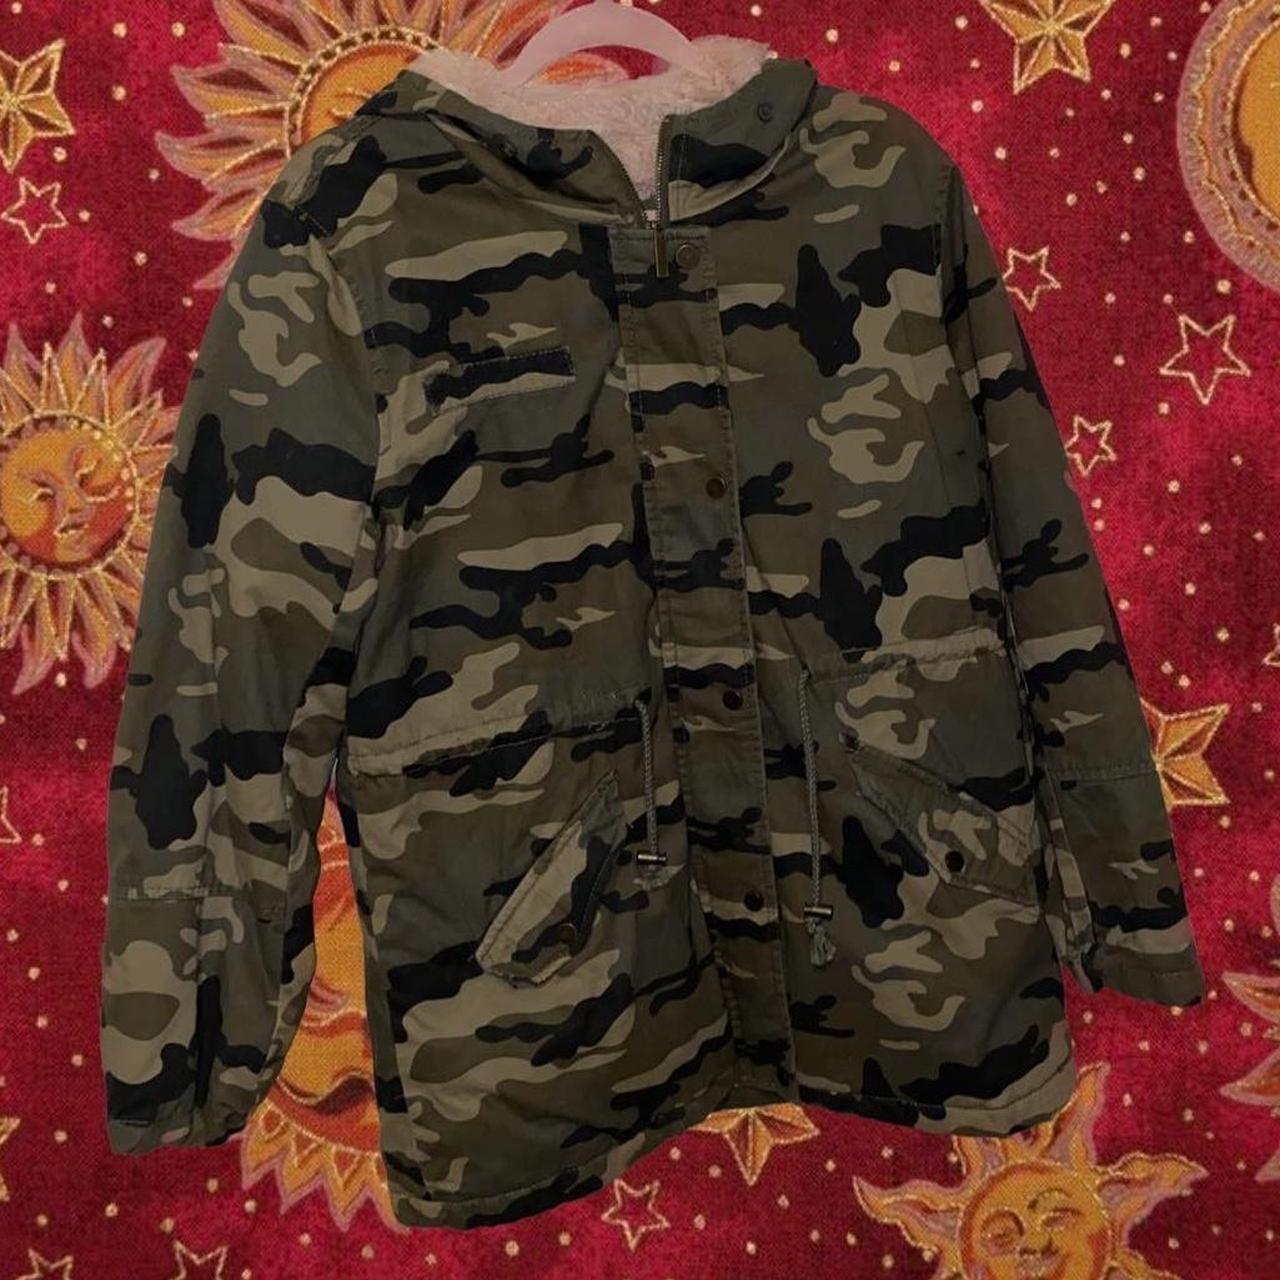 Army print pink faux fur lined hooded jacket! Show... - Depop